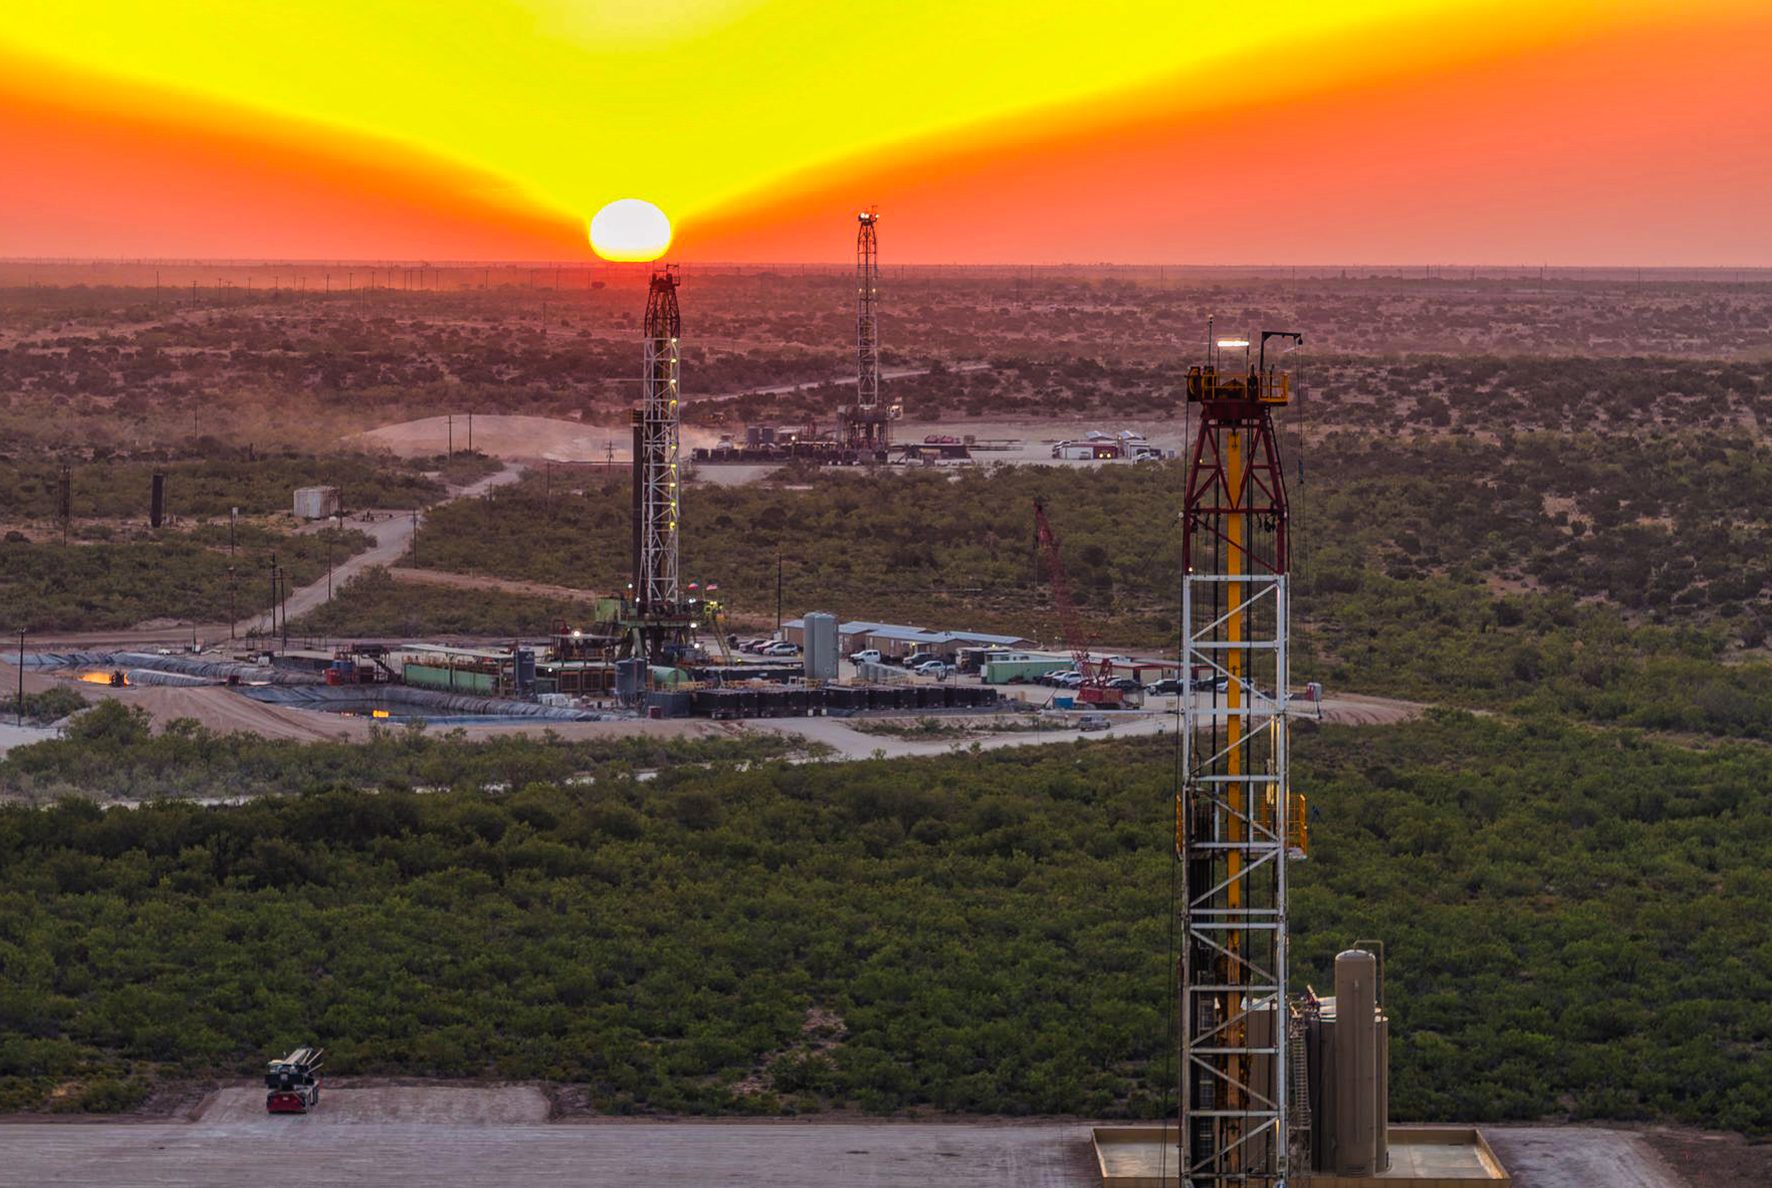 Hero image for Another beautiful morning in the Permian Basin